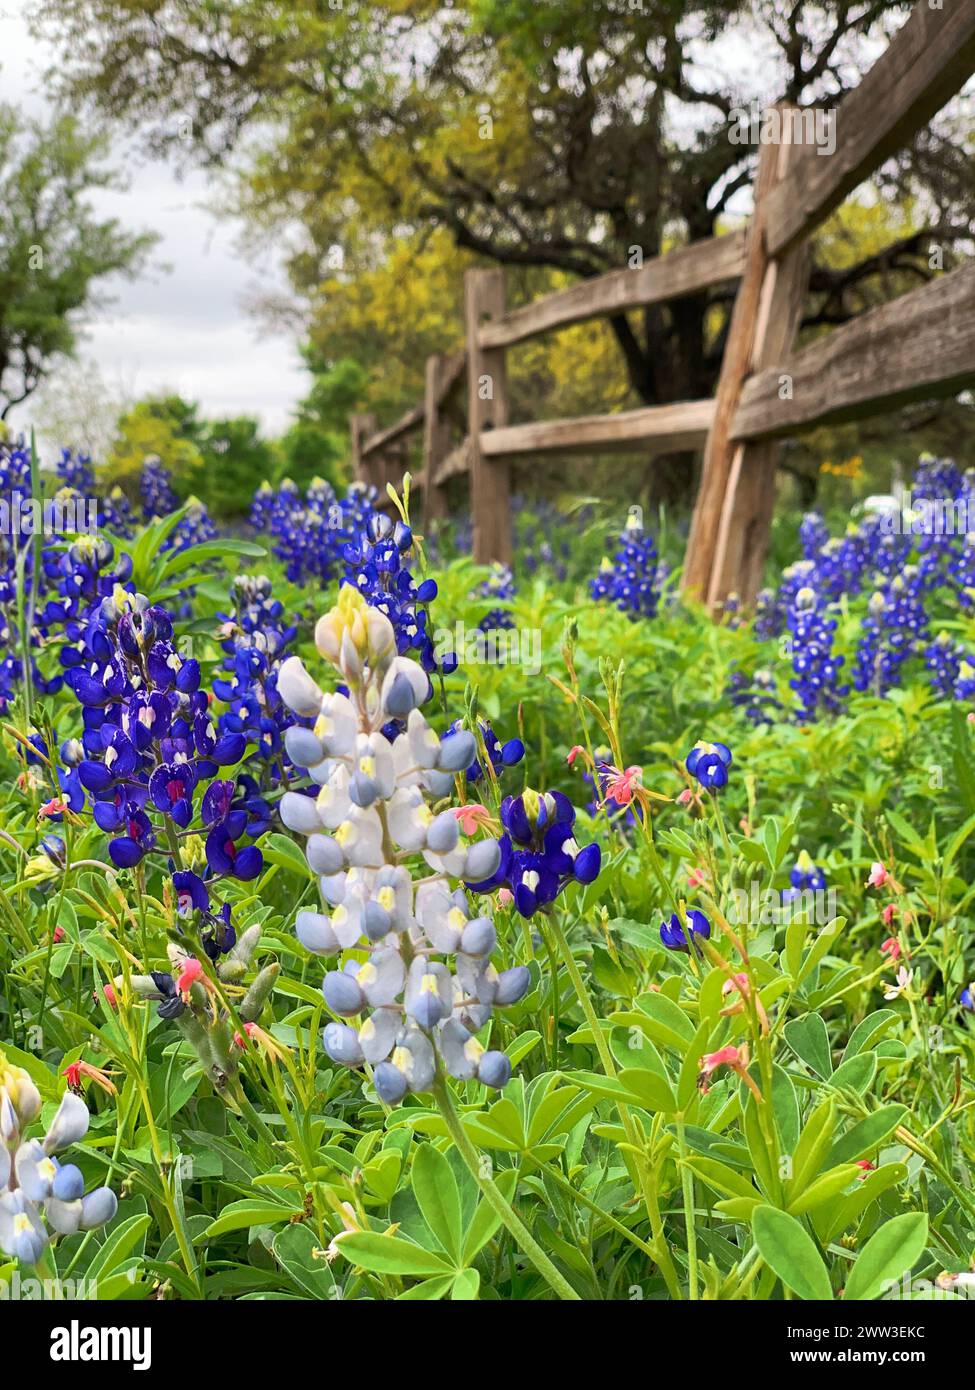 Field of bluebonnets next to a wooden fence at Zilker Park in Austin, Texas Stock Photo